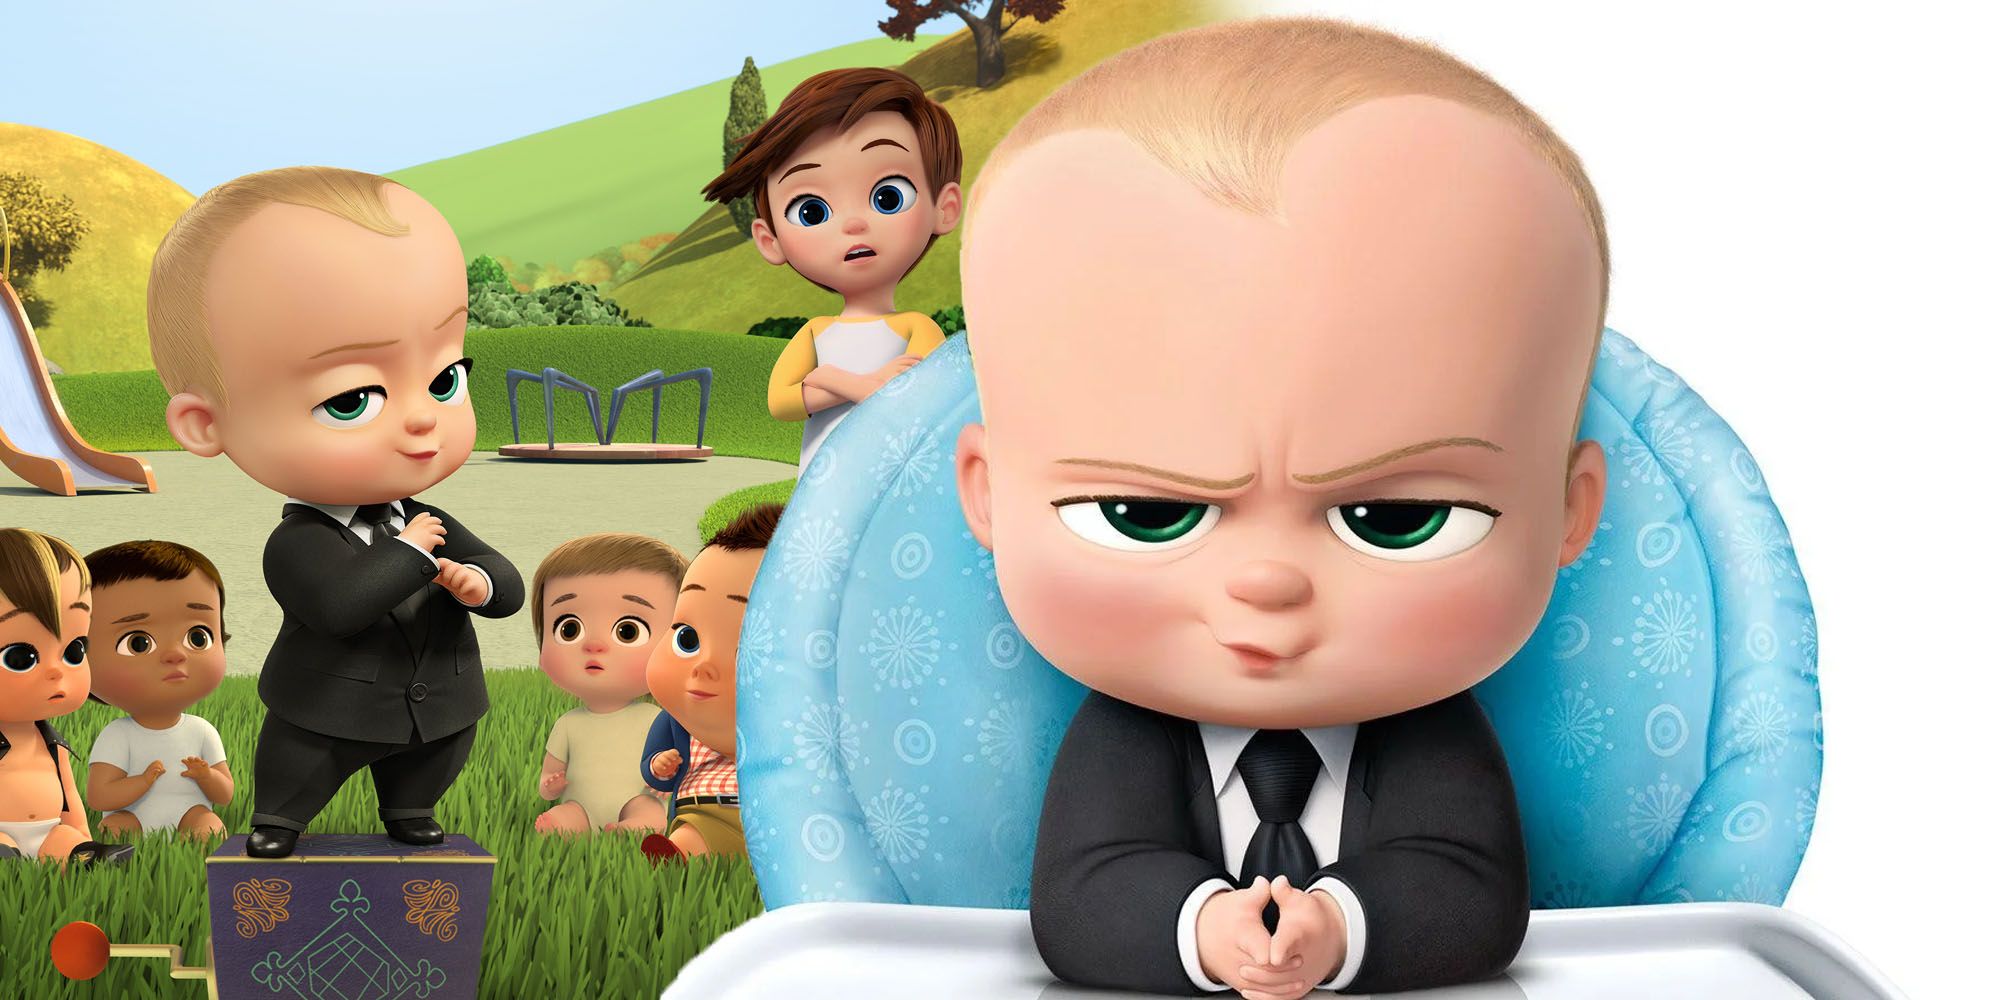 Blended image of the Boss Baby smiling from his crib and smiling in front of his friends